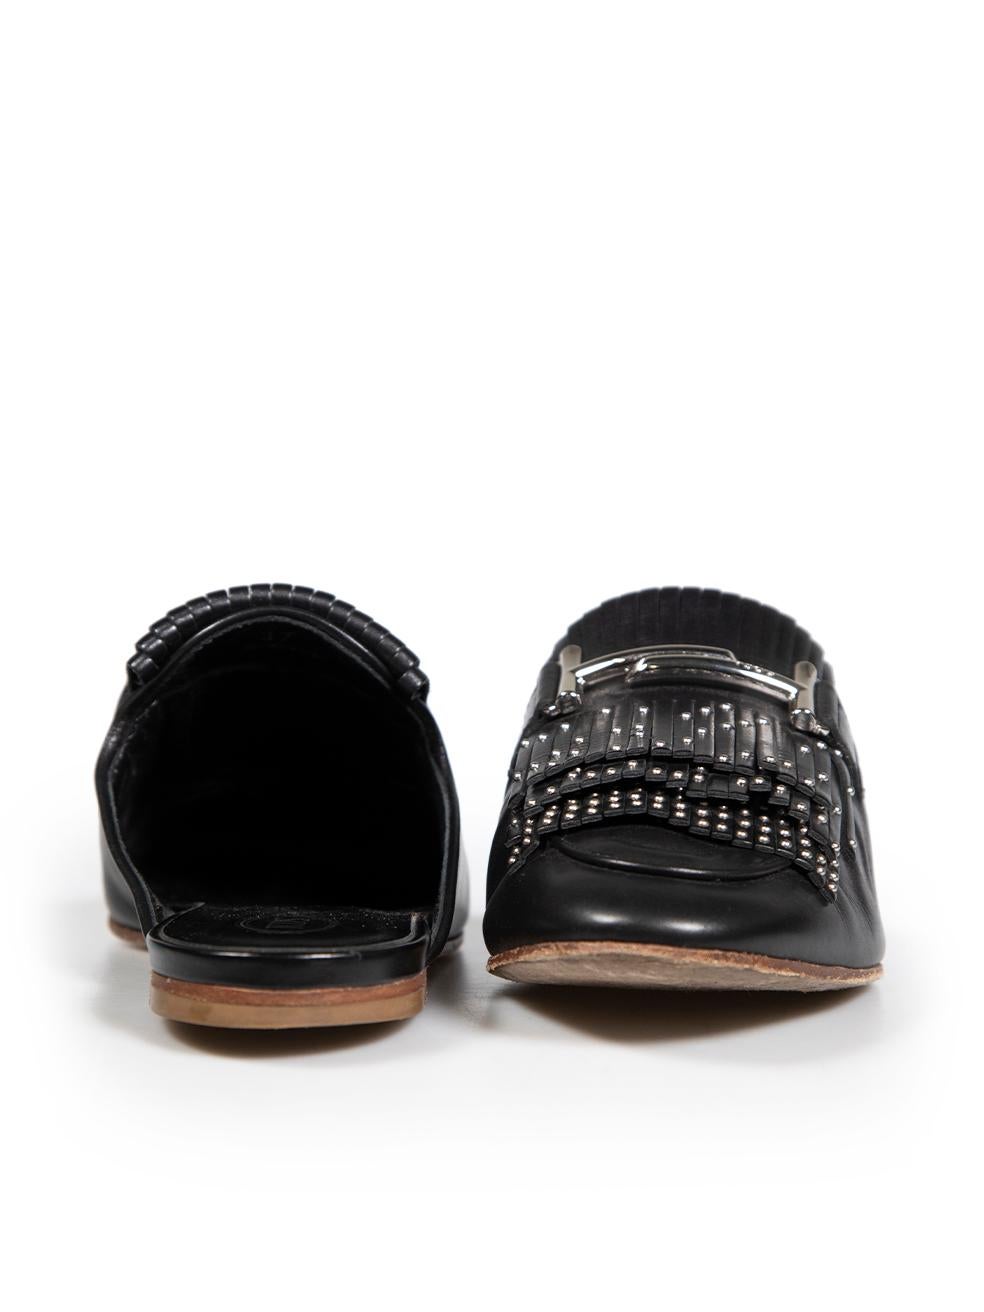 Tod's Black Leather Studded Fringed Mules Size IT 37 In Good Condition For Sale In London, GB